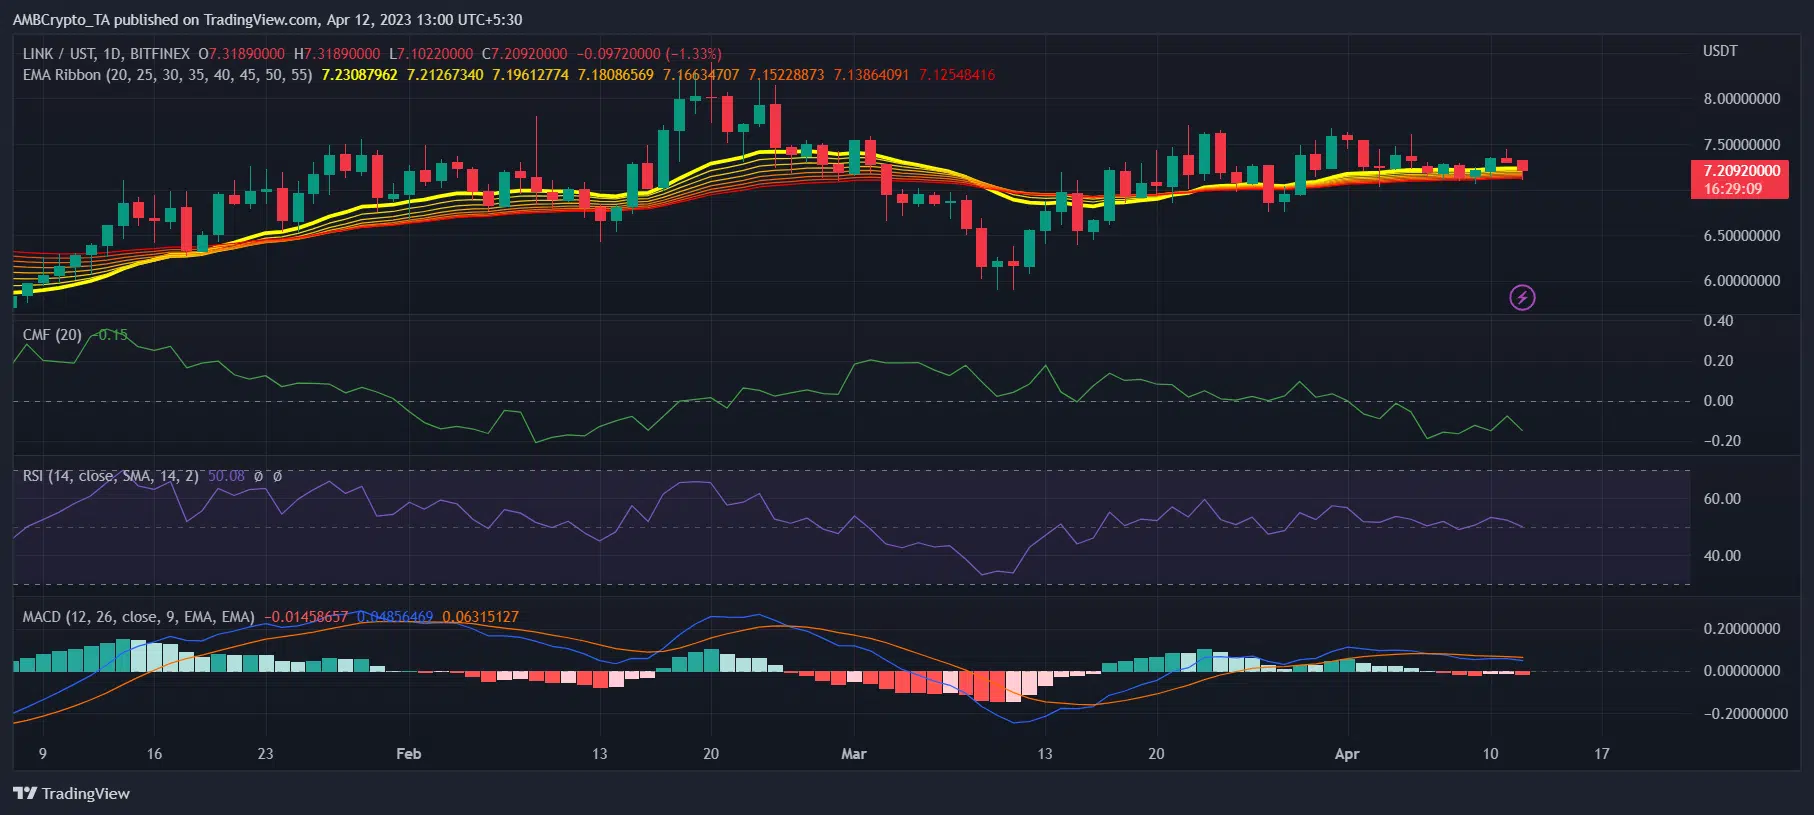 TRX weighted sentiment and Tron development activity